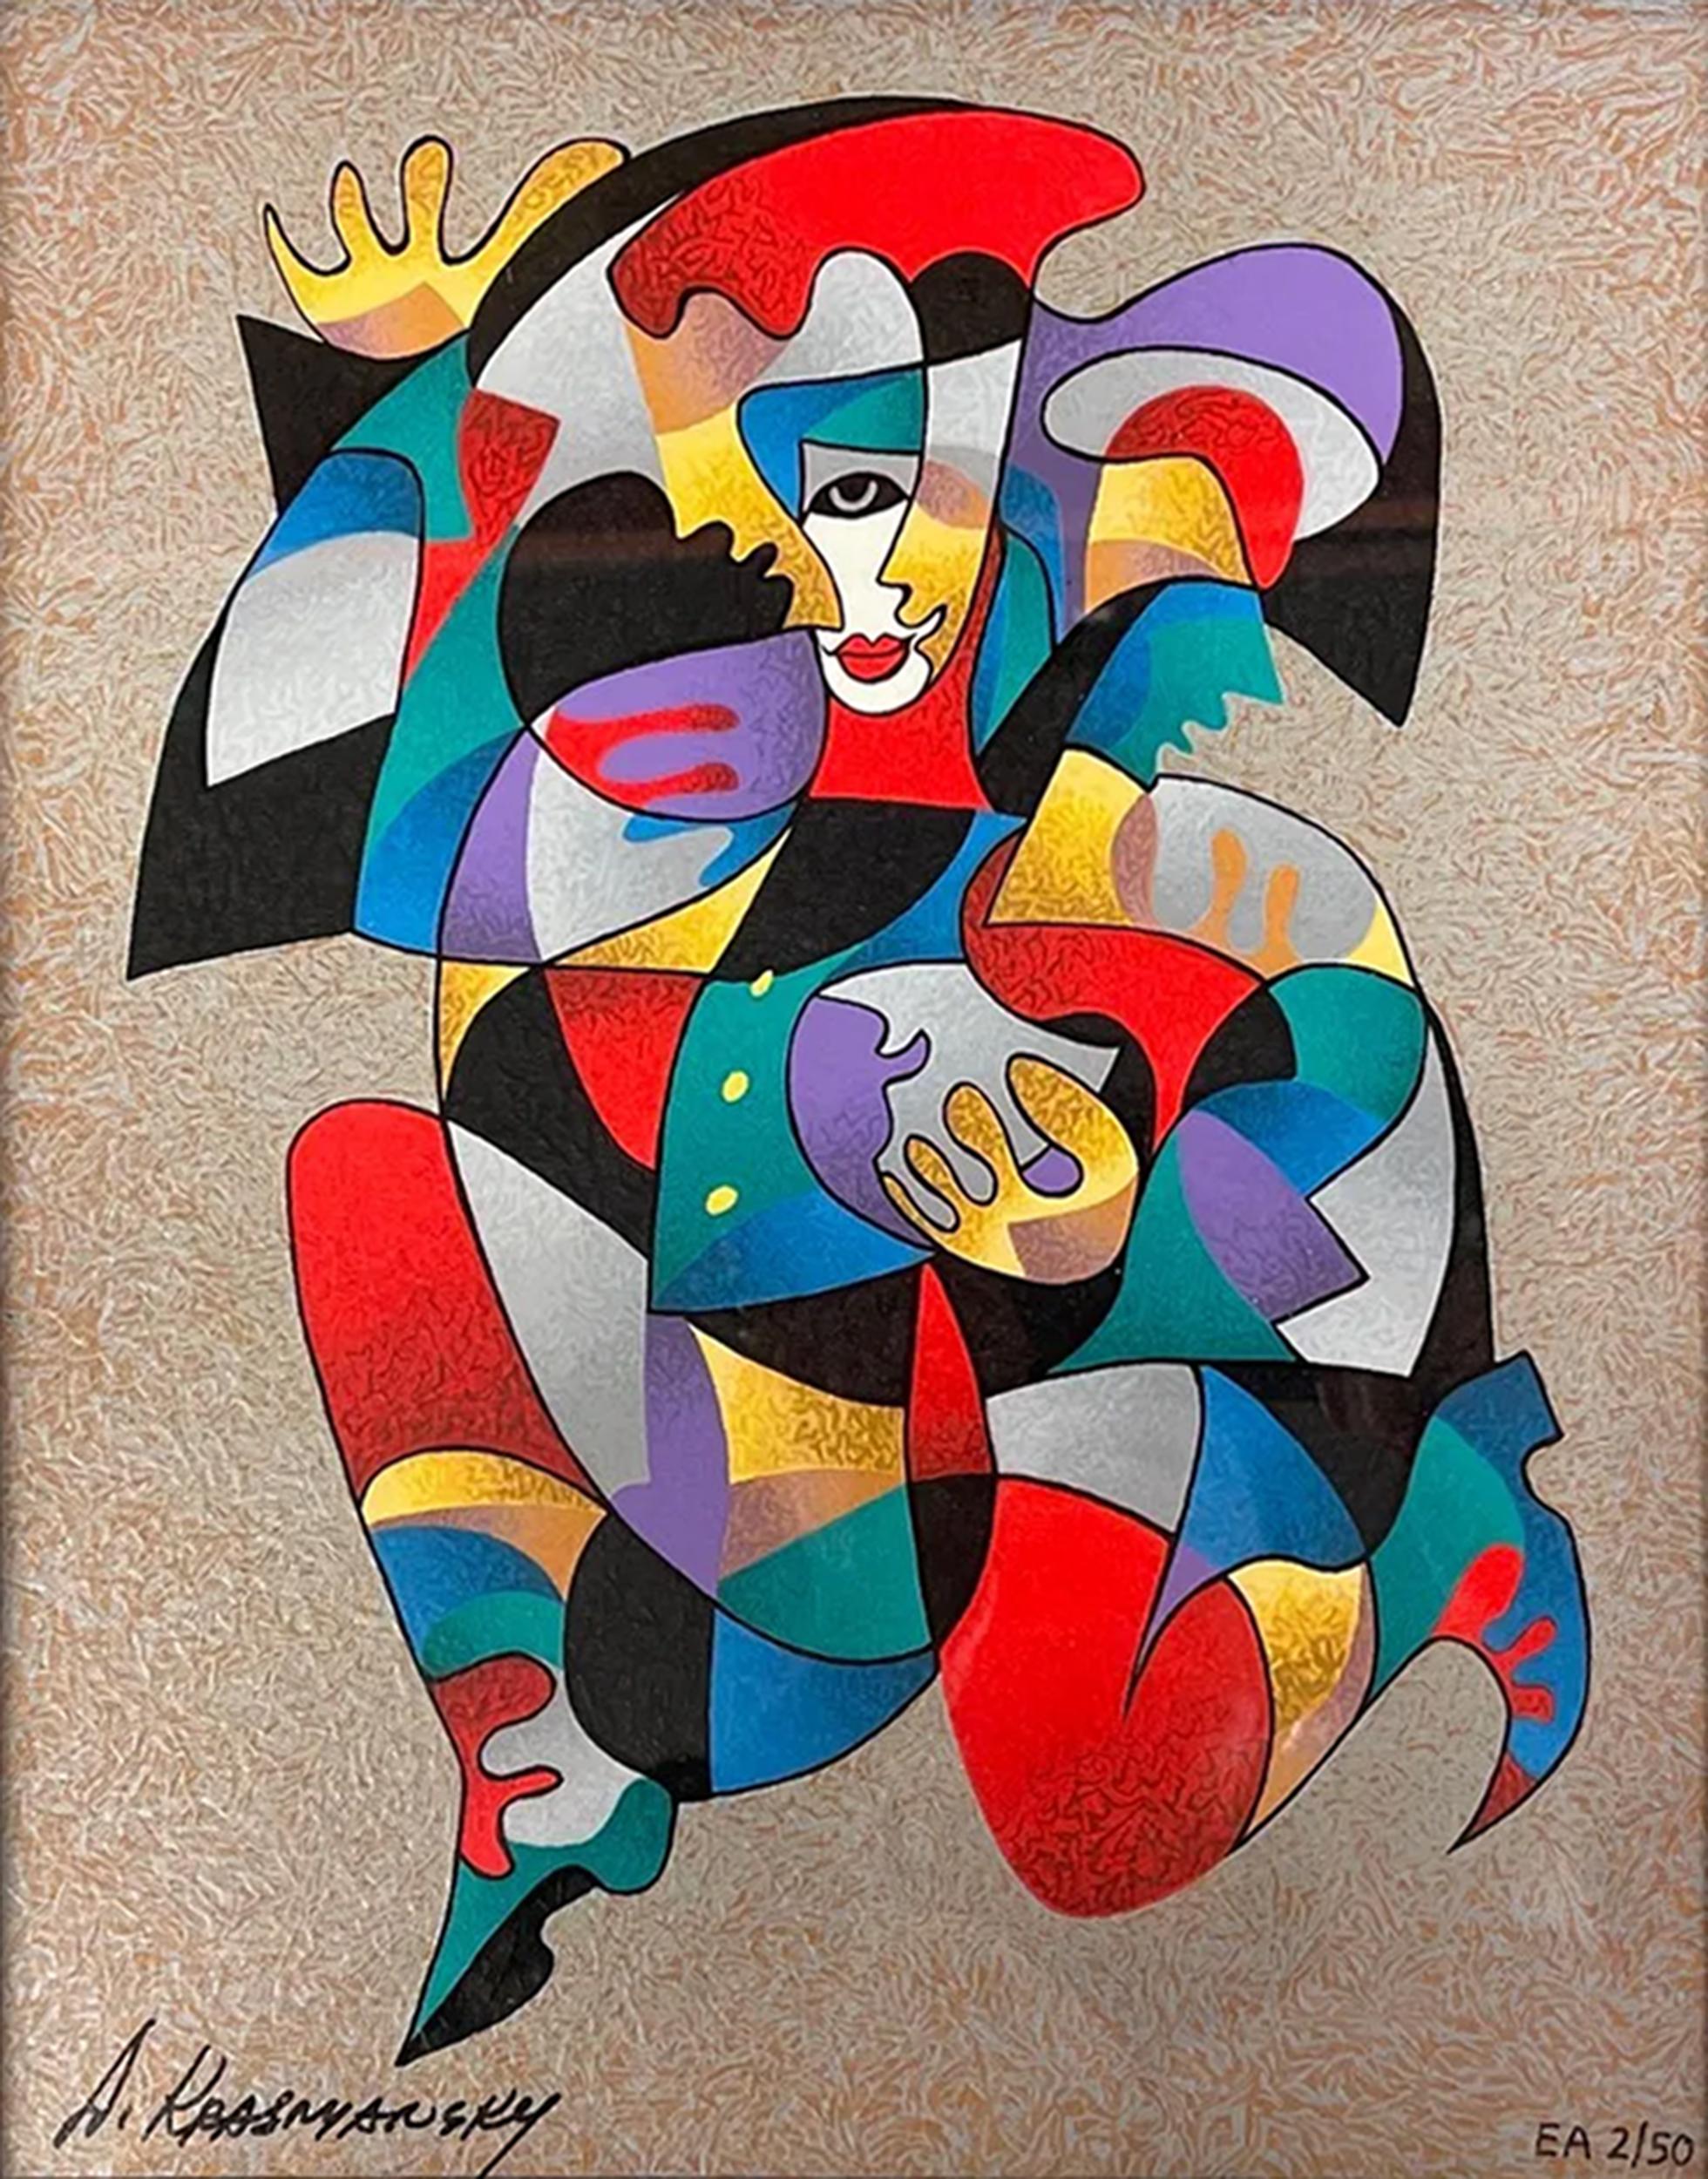 This surreal, contemporary-cubist screenprint by the artist is reminiscent of a harlequin kneeling before an audience, one hand raised. The piece is nicely framed and is signed and numbered in marker by the artist.